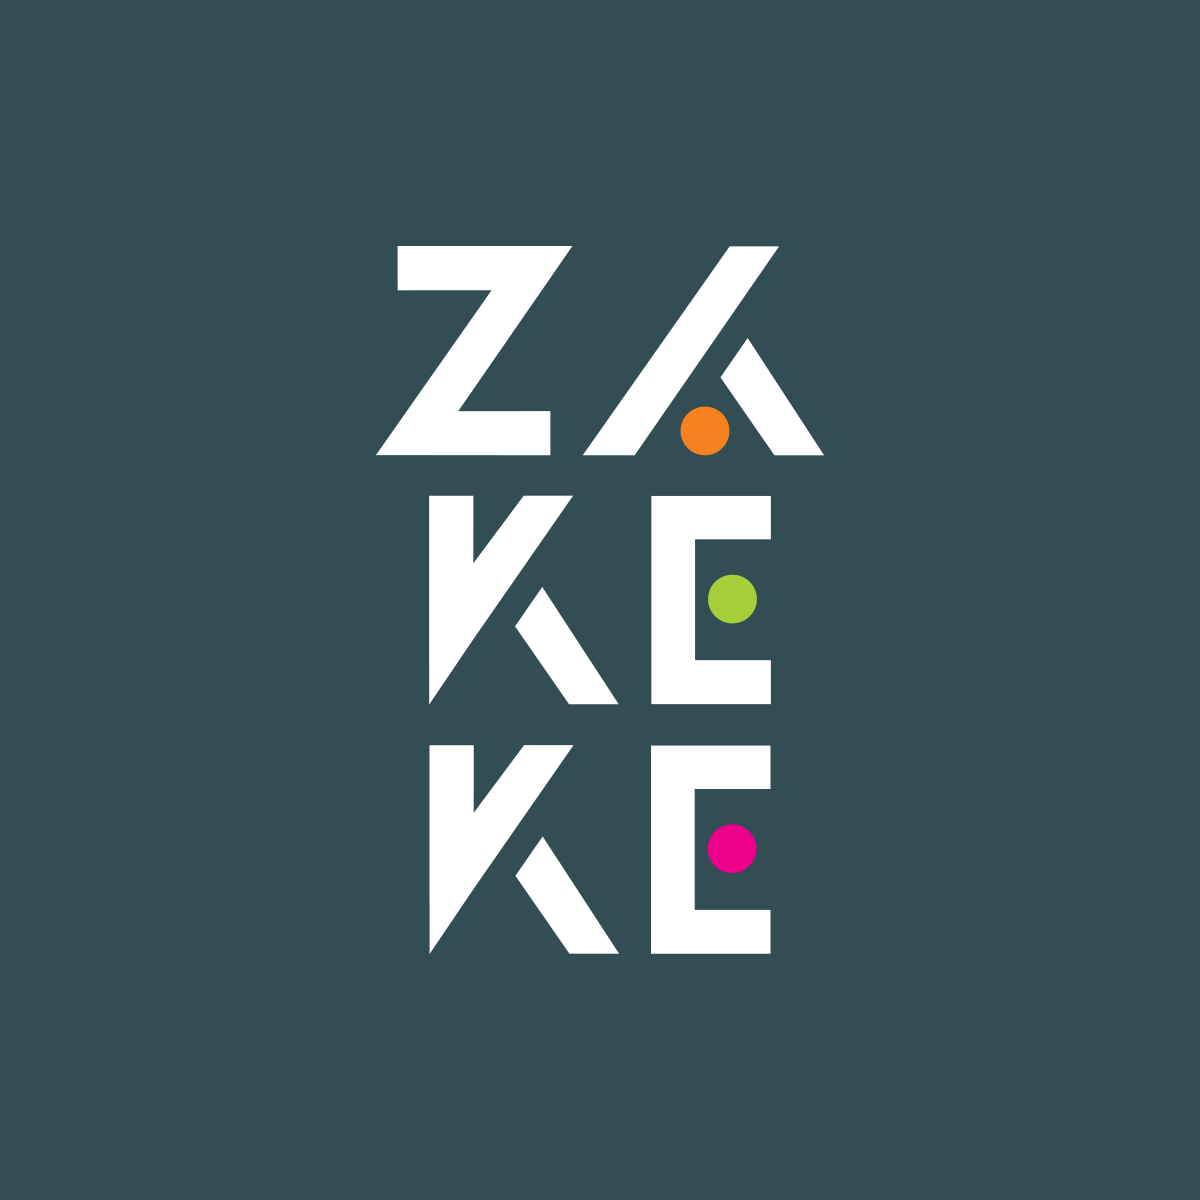 Hire Shopify Experts to integrate Zakeke Product Customizer app into a Shopify store